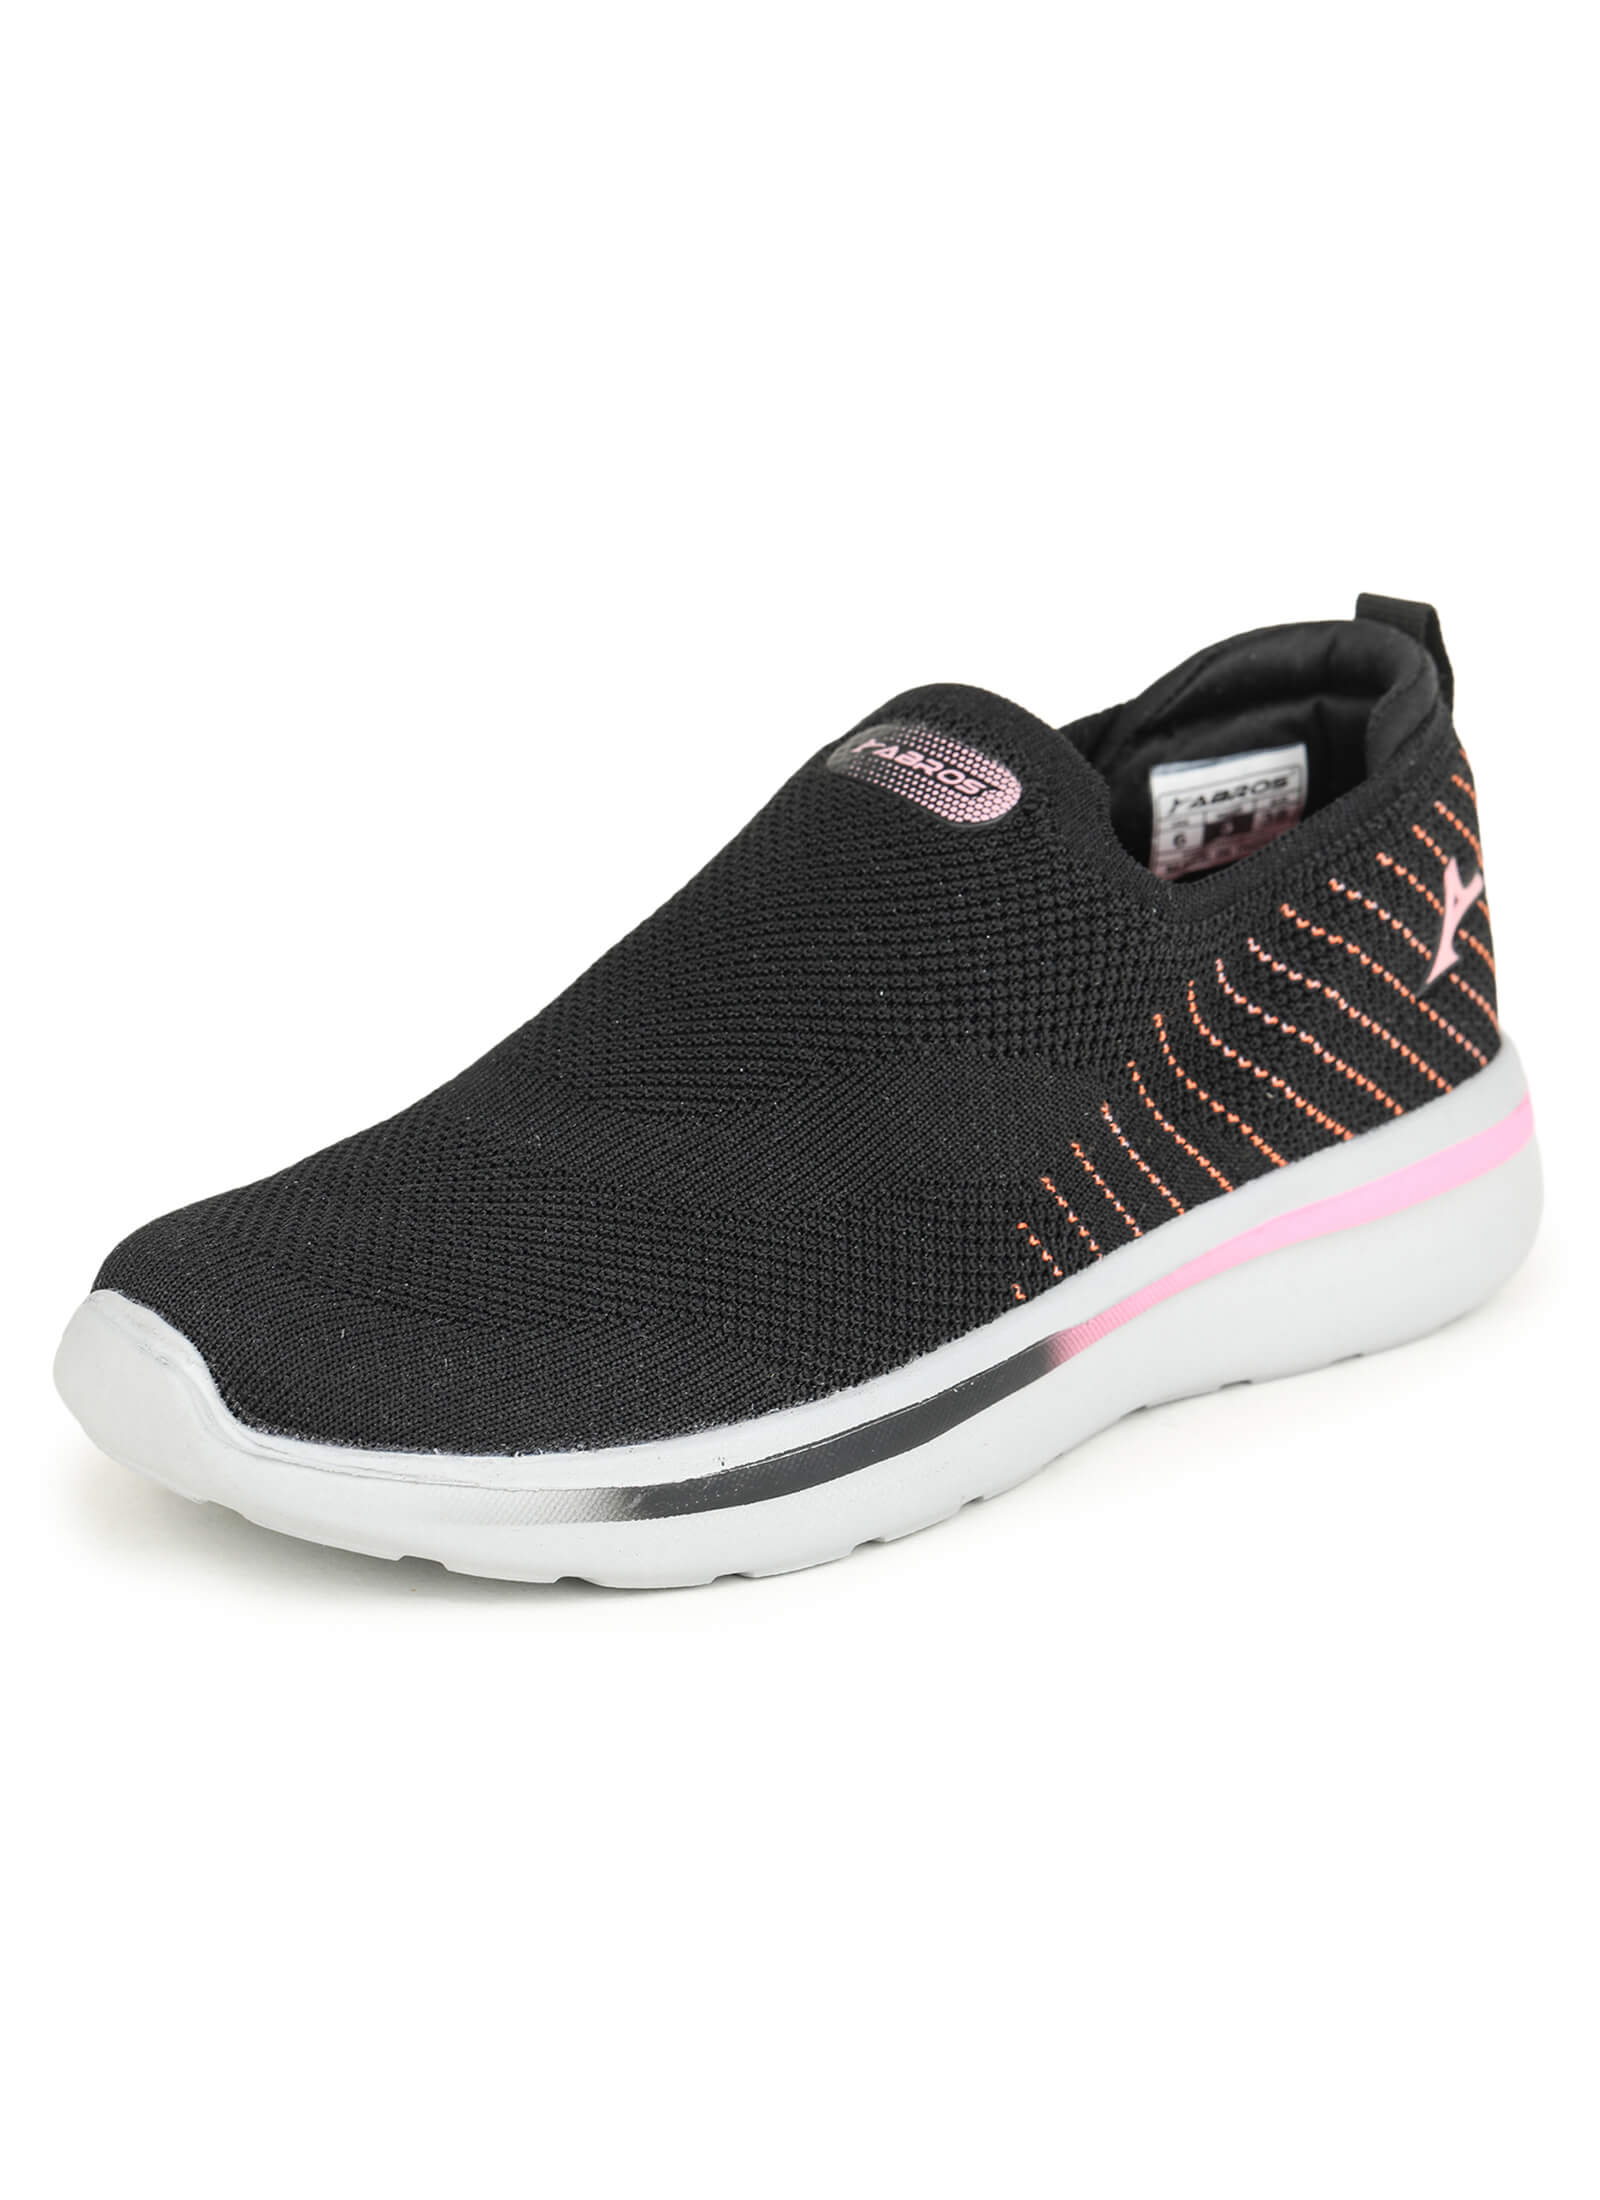 Alice-2 Sports Shoes For Women